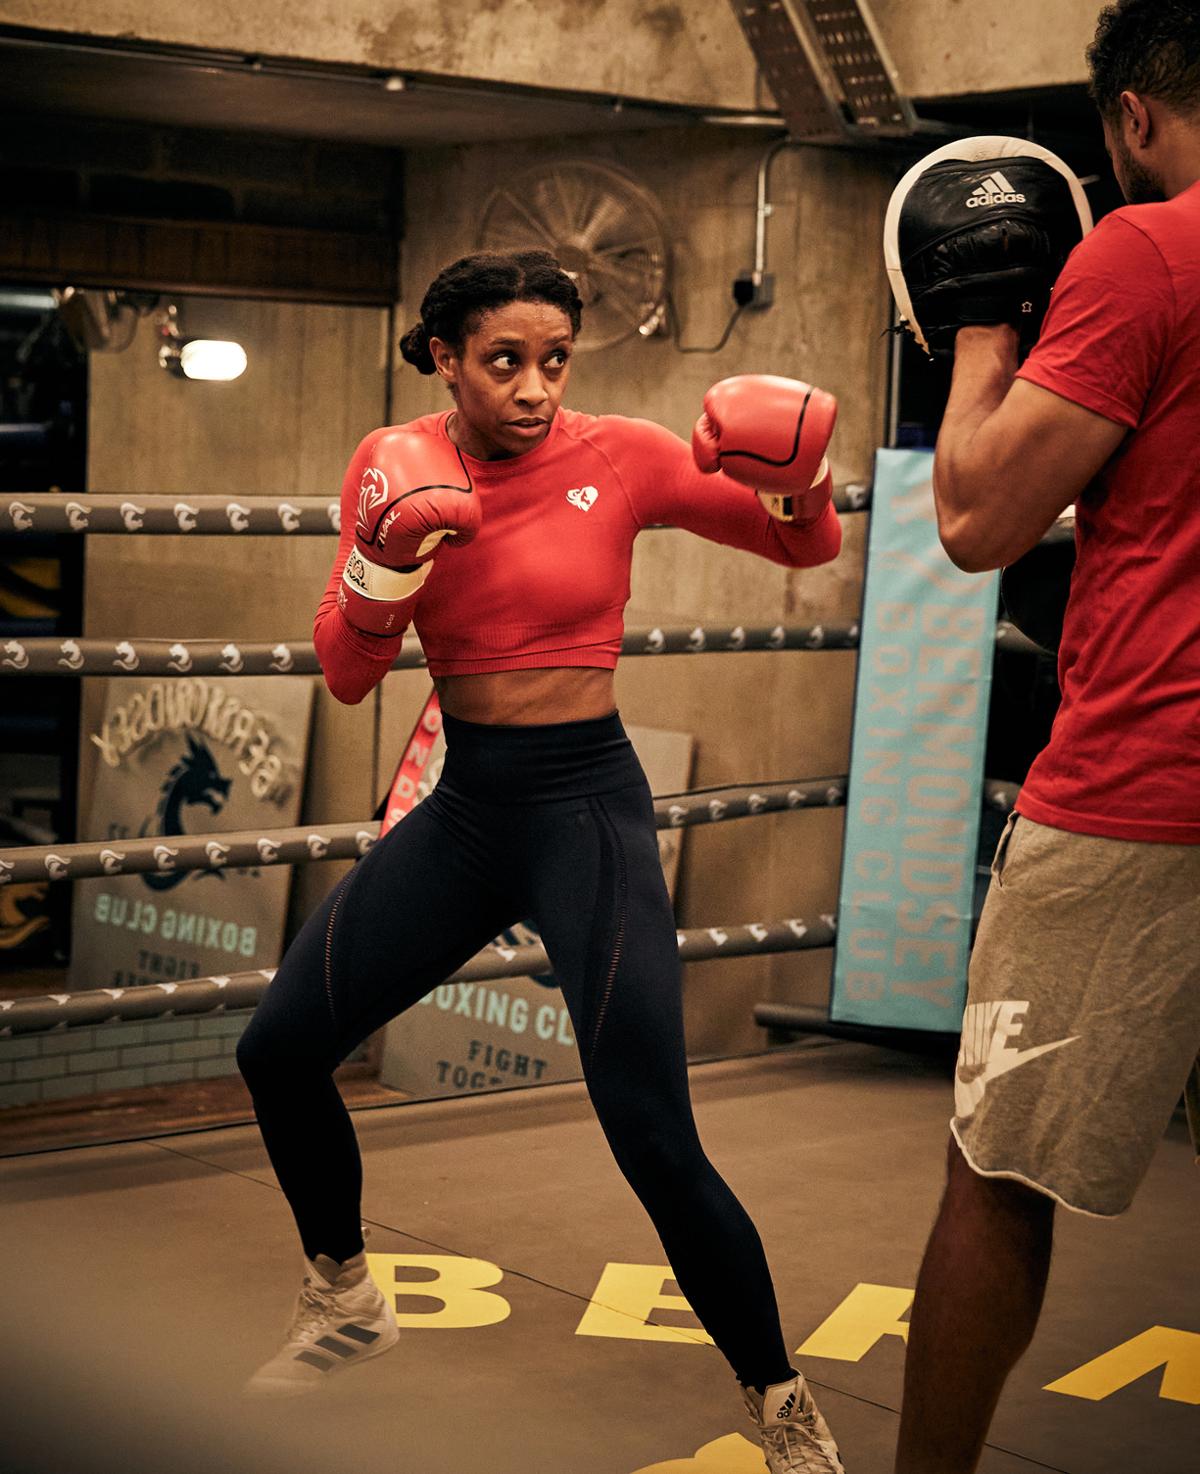 Boxing is incredibly cerebral says Klempner / PHOTO: The Boxing House Gyms